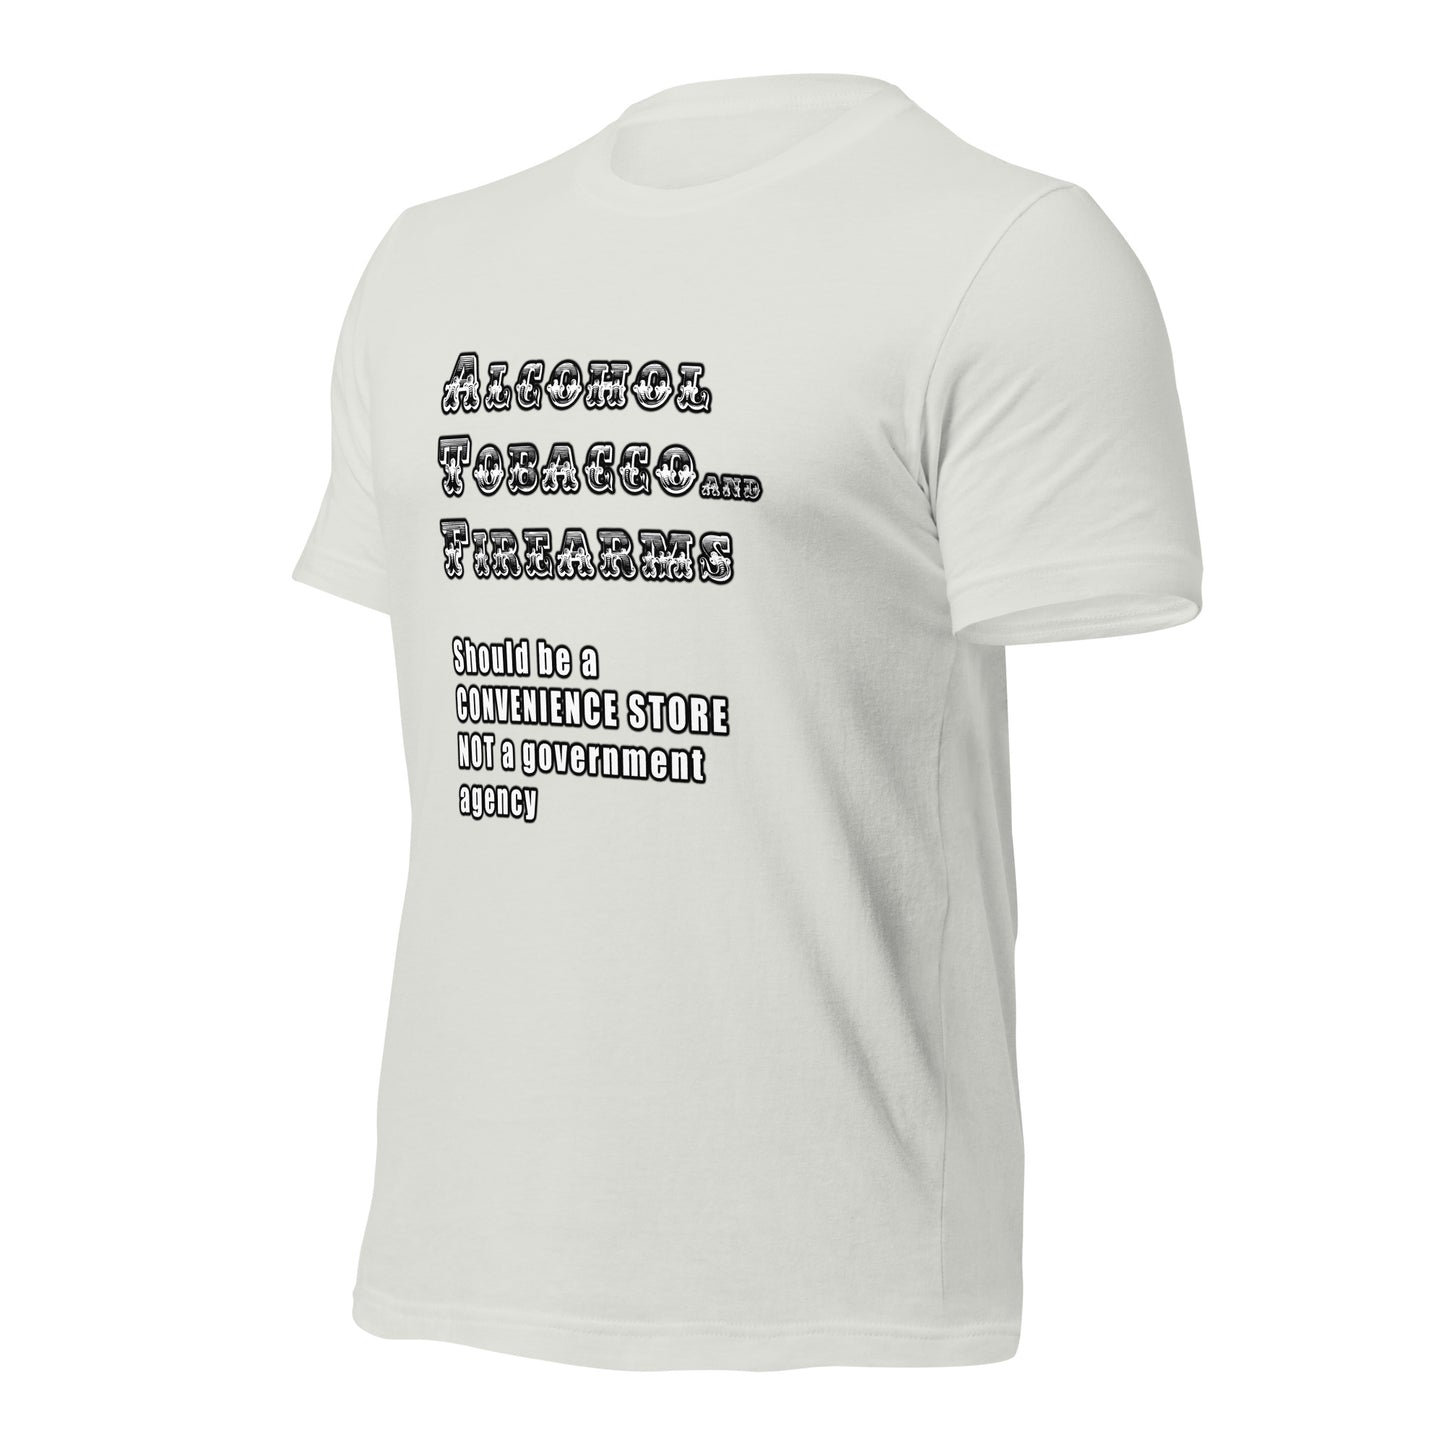 Alcohol Tobacco and Firearms should be a convenience store and NOT a government agency - Unisex t-shirt